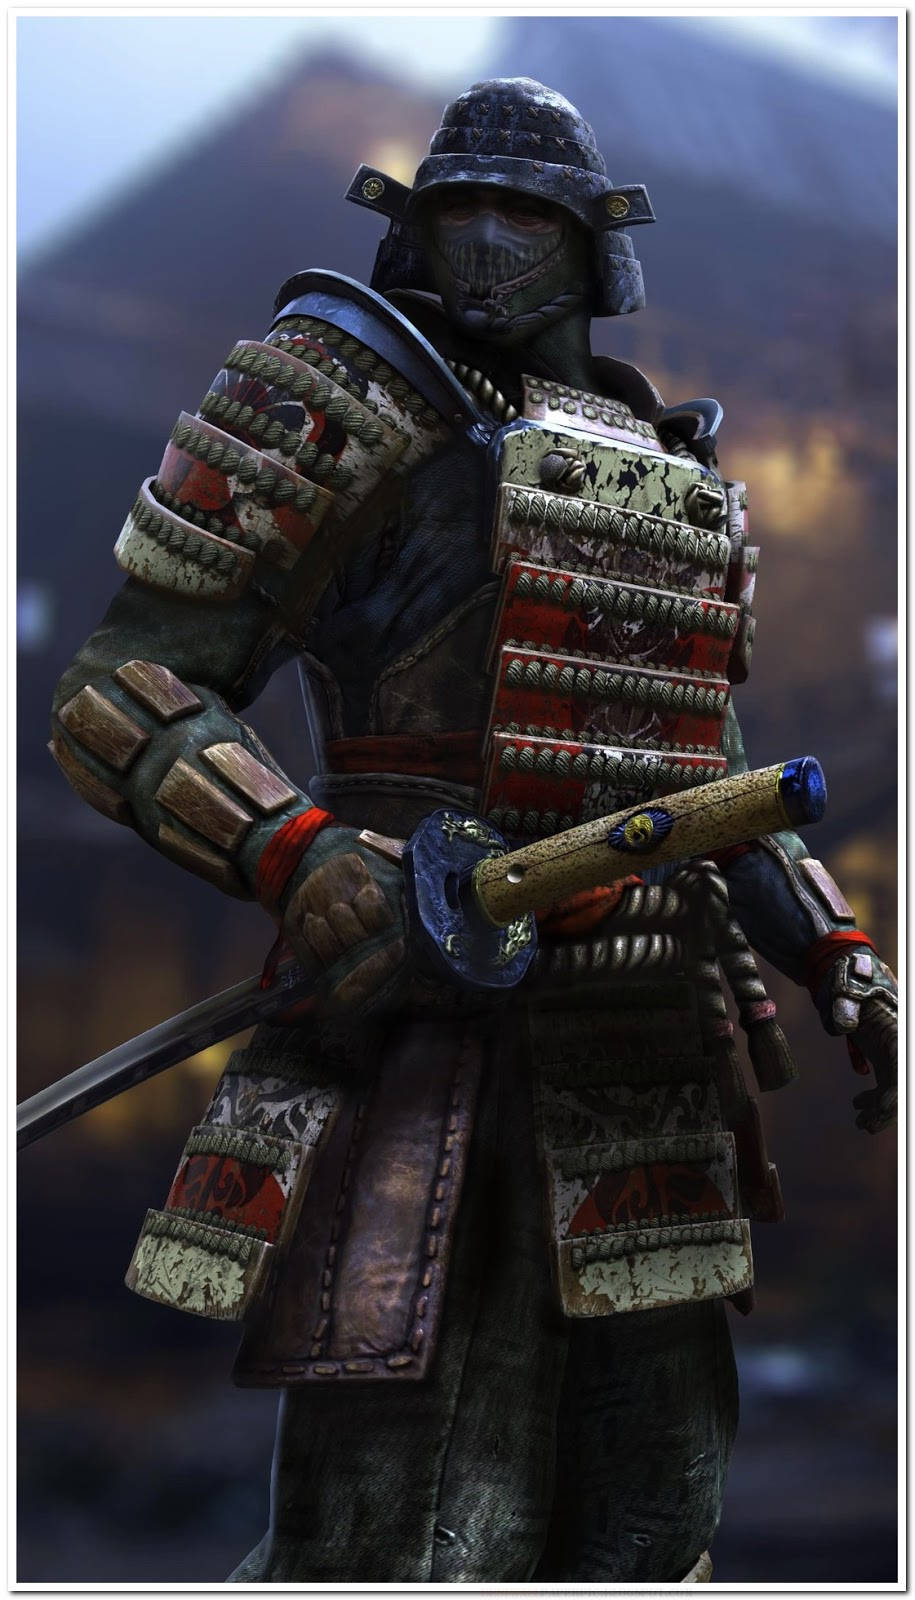 Epic Battle Stance Of Orochi Warrior From For Honor Game On Phone Screen Wallpaper